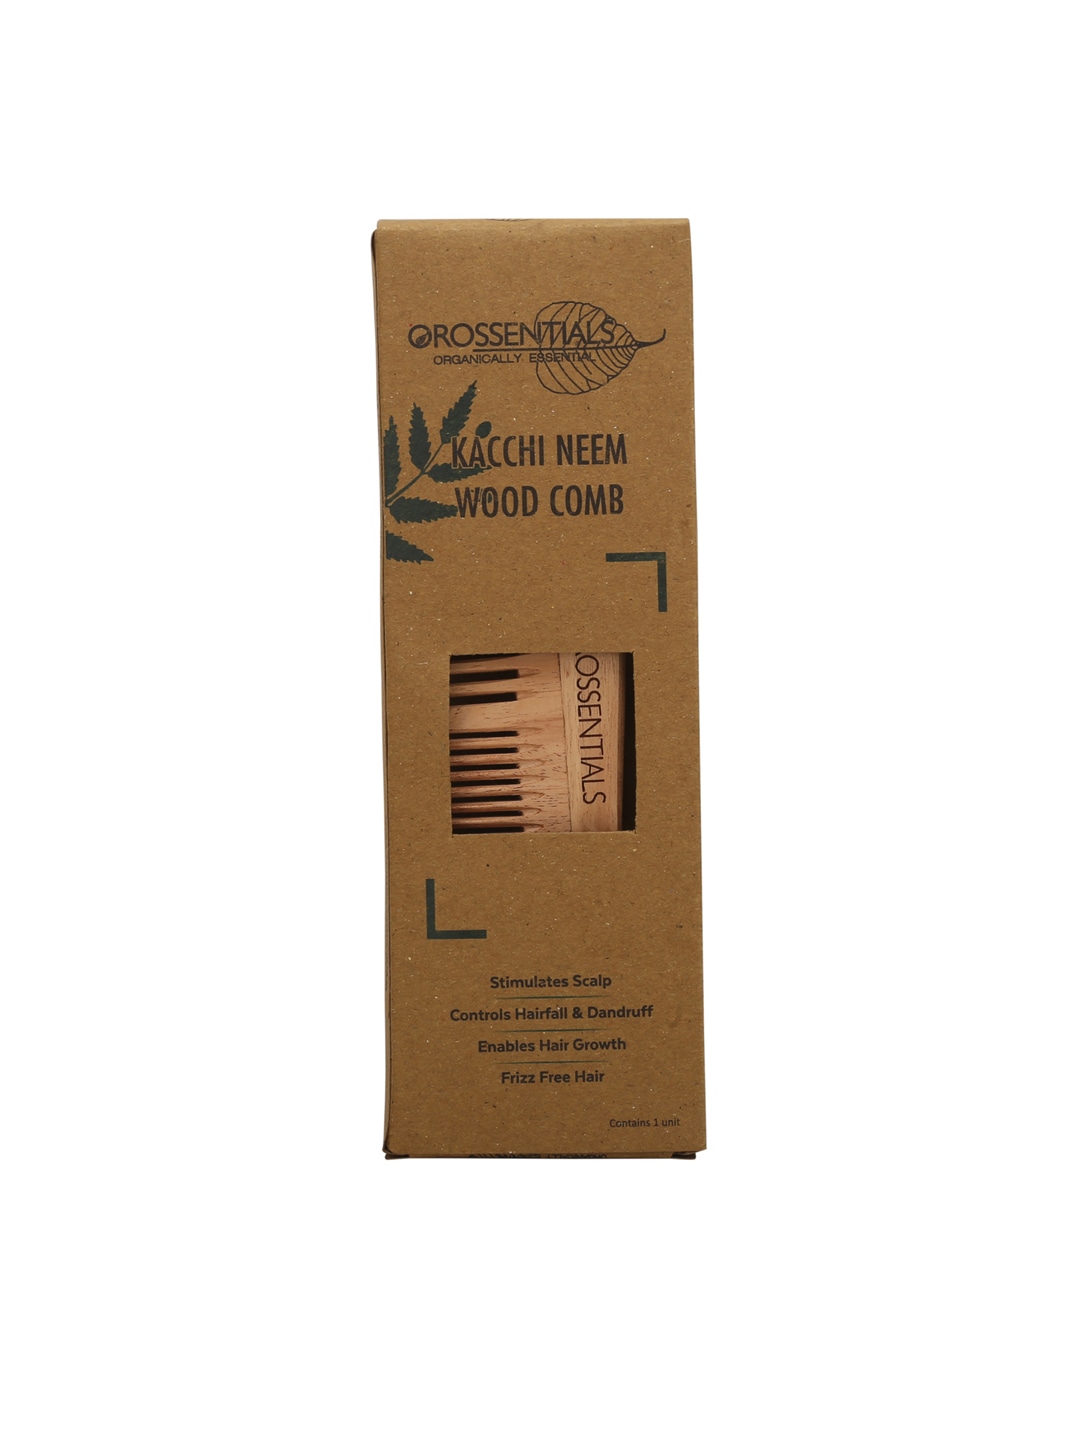 OROSSENTIALS Neem Wooden Two-in-One Comb Price in India